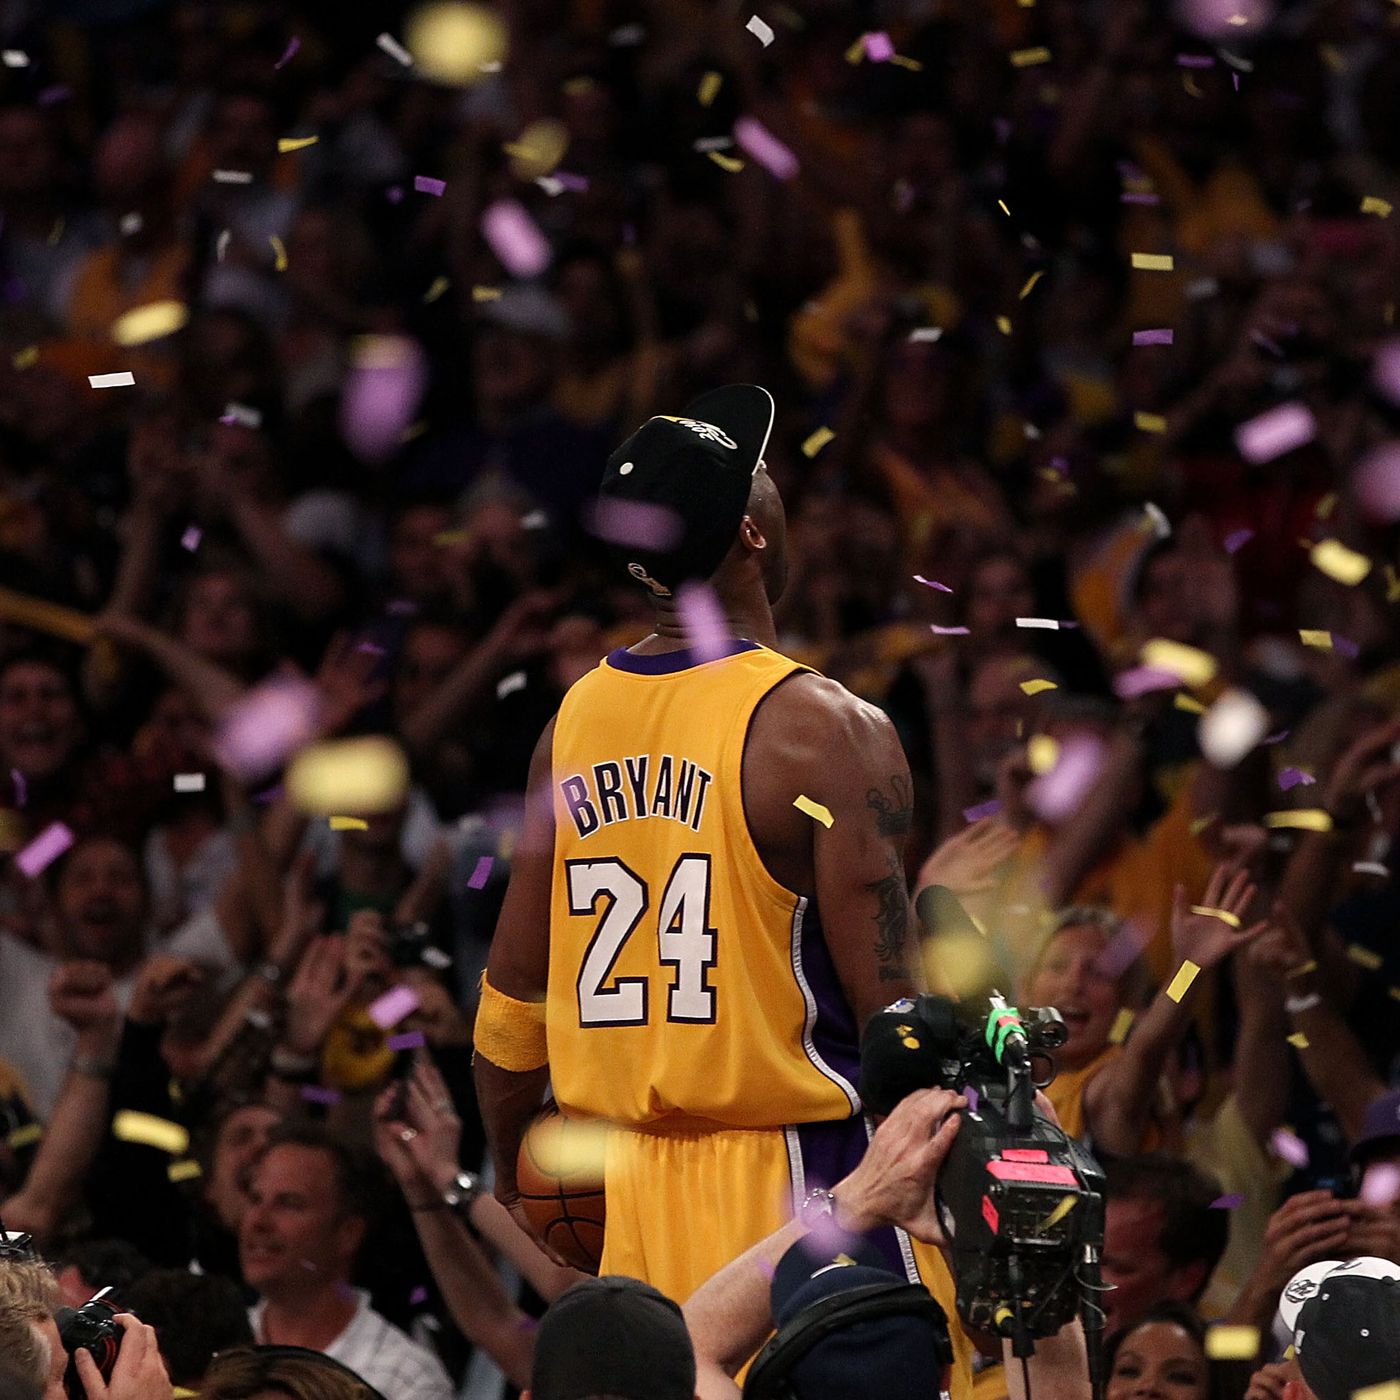 What the conversation around Kobe Bryant's death says about American memory  - Vox